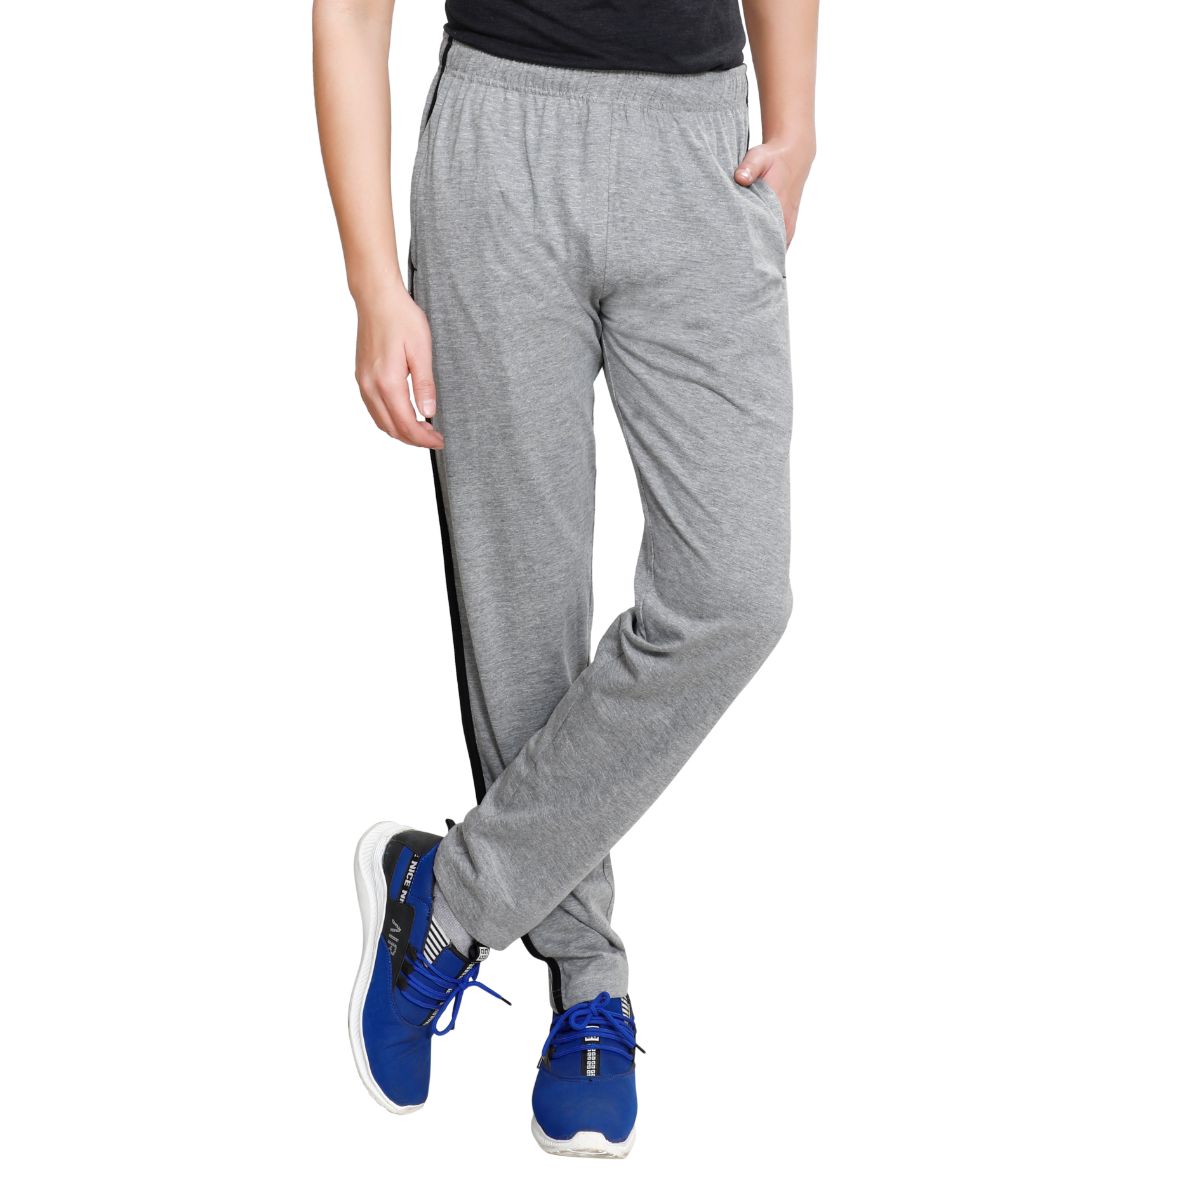 Buy Regular Fit Men Trousers Royal Blue Poly Cotton Blend for Best Price,  Reviews, Free Shipping